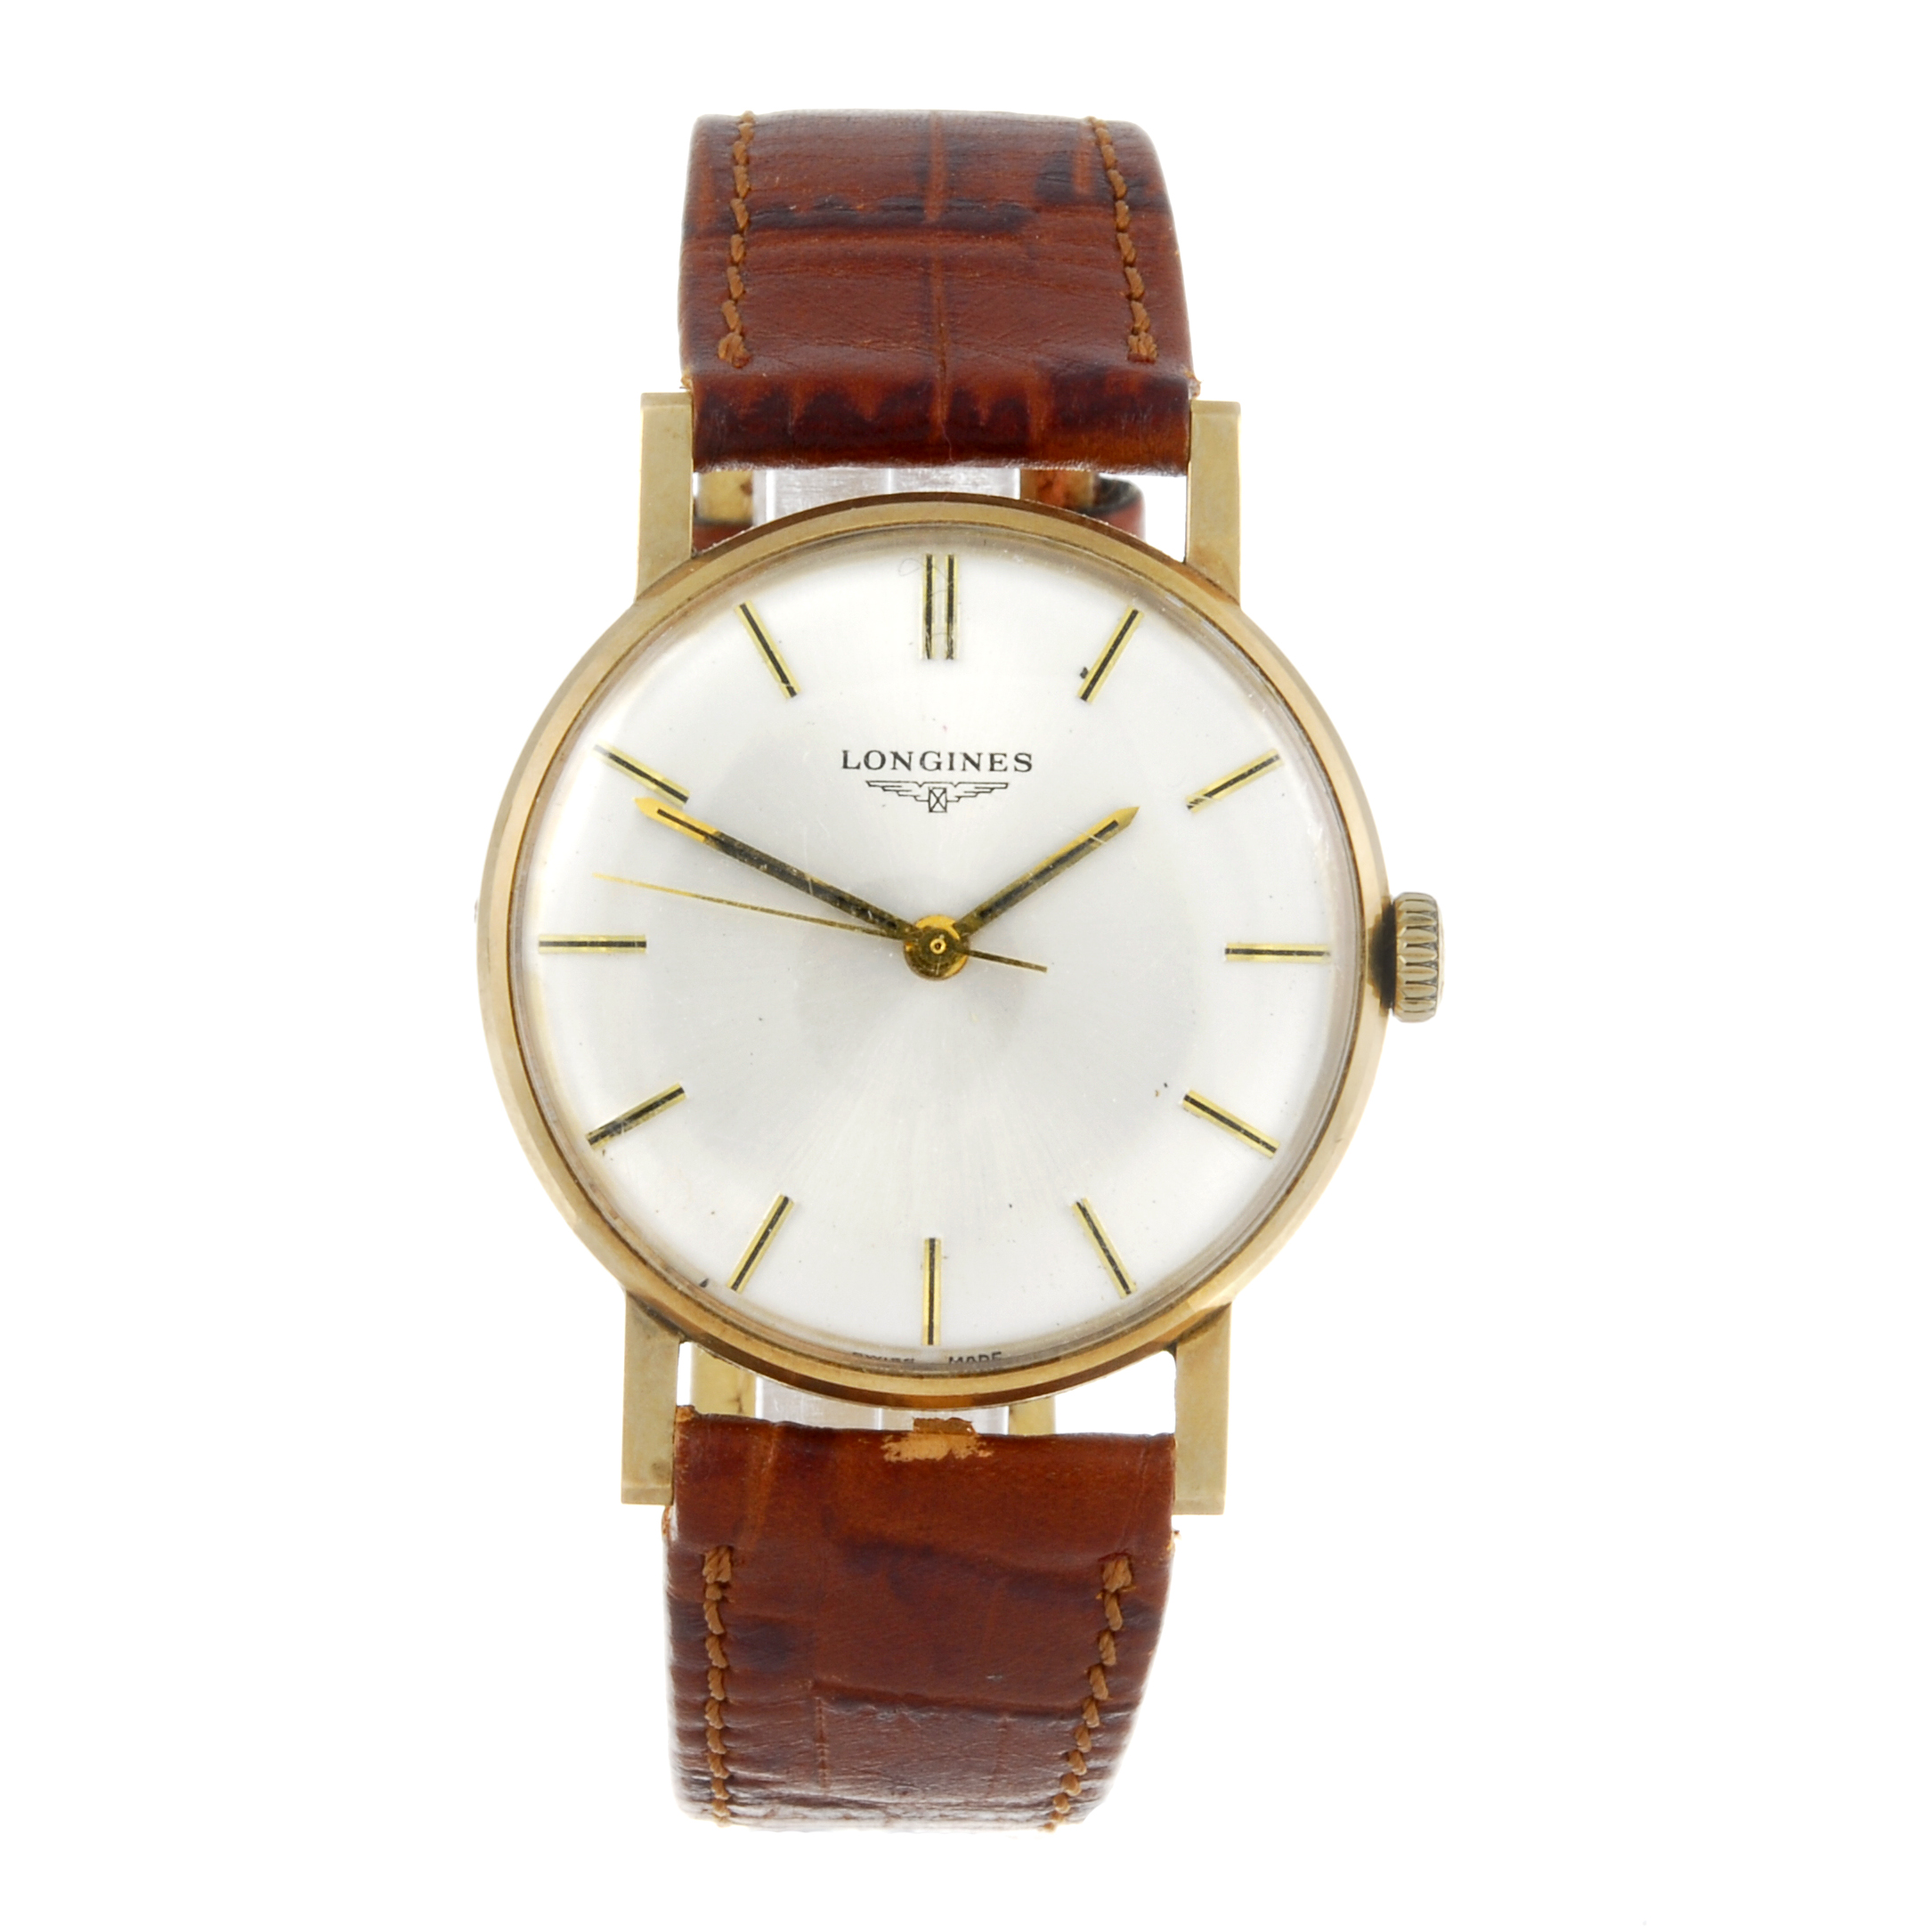 LONGINES - a gentleman's wrist watch. 9ct yellow gold case with engraved case back, hallmarked